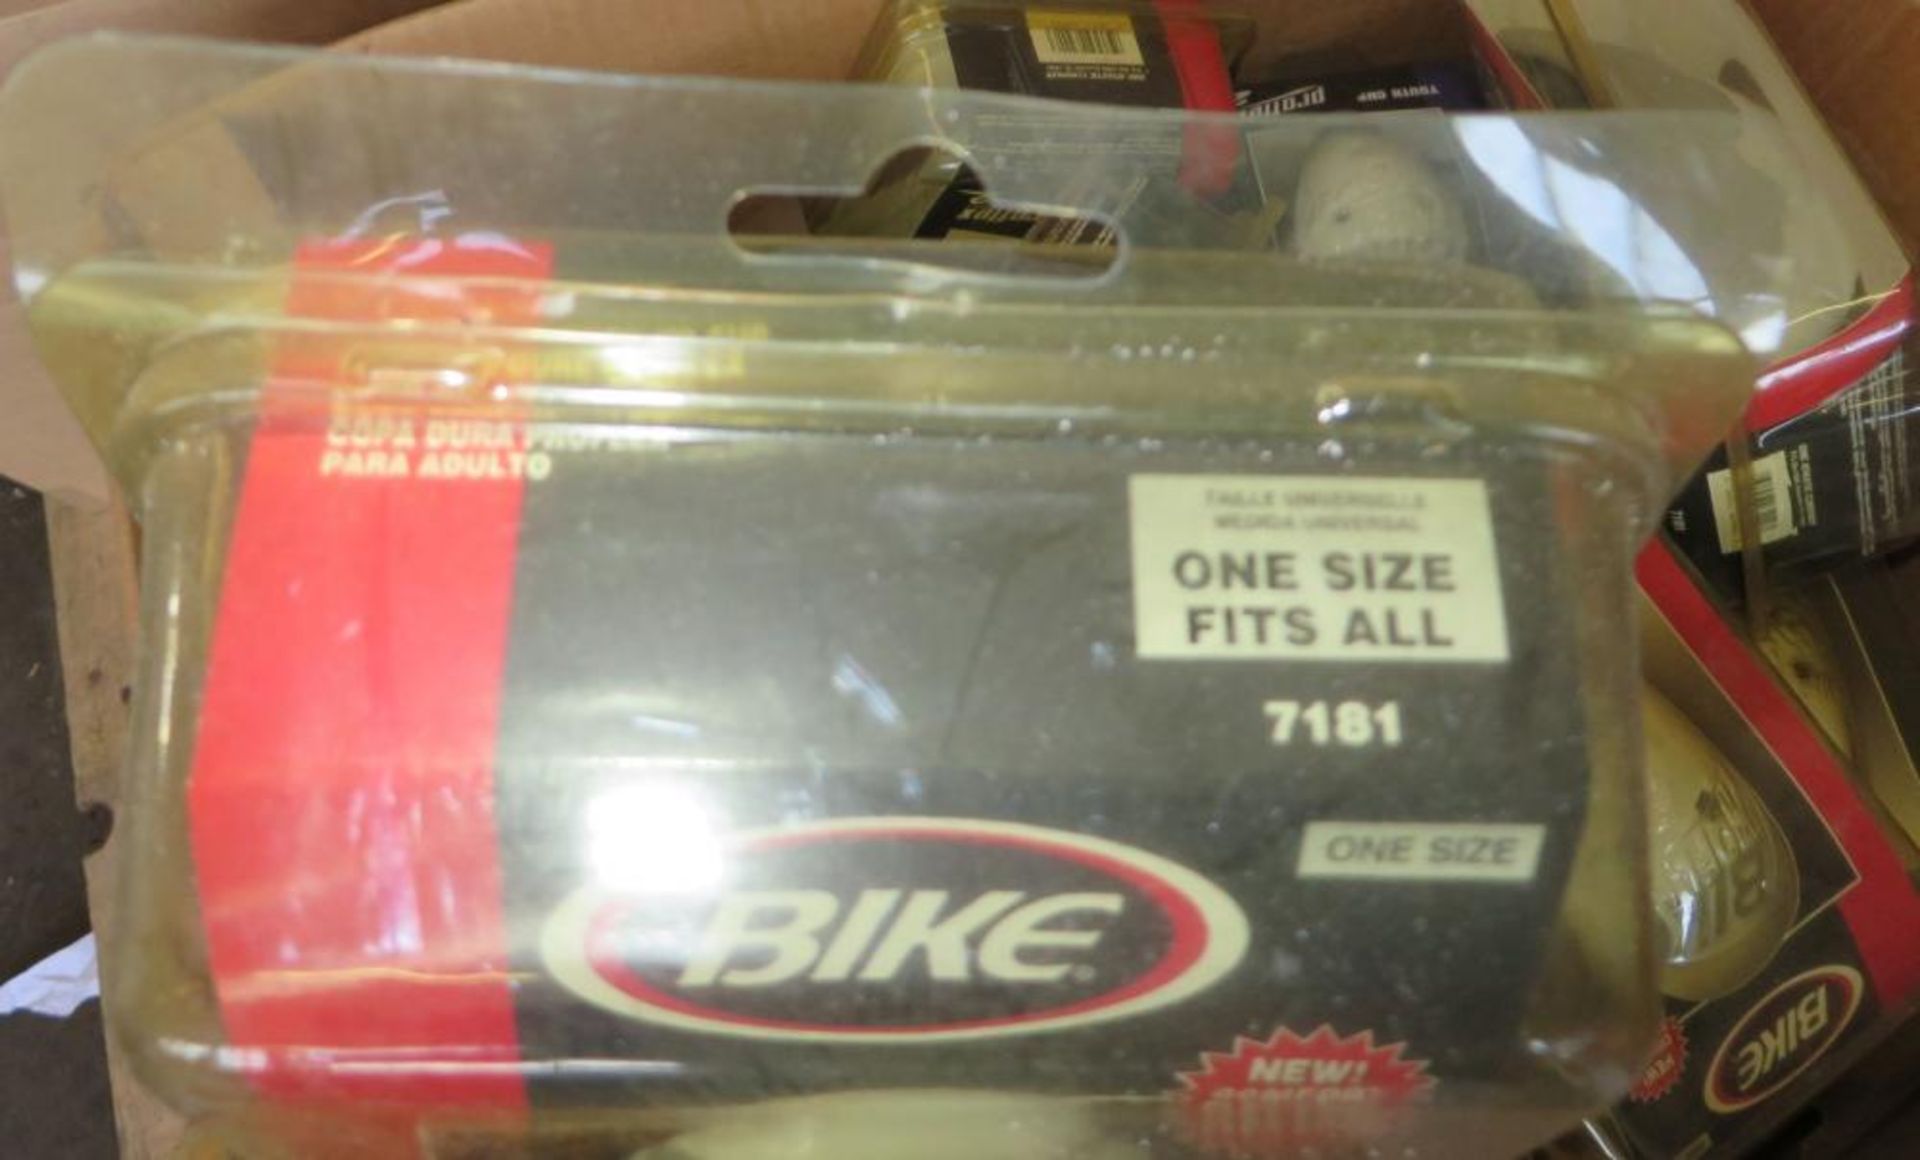 28 x Bike Protective Cups - 26 Adult, 2 Youth - CL185 - Ref: DRT0669 - Location: Stoke ST3 - Image 2 of 2